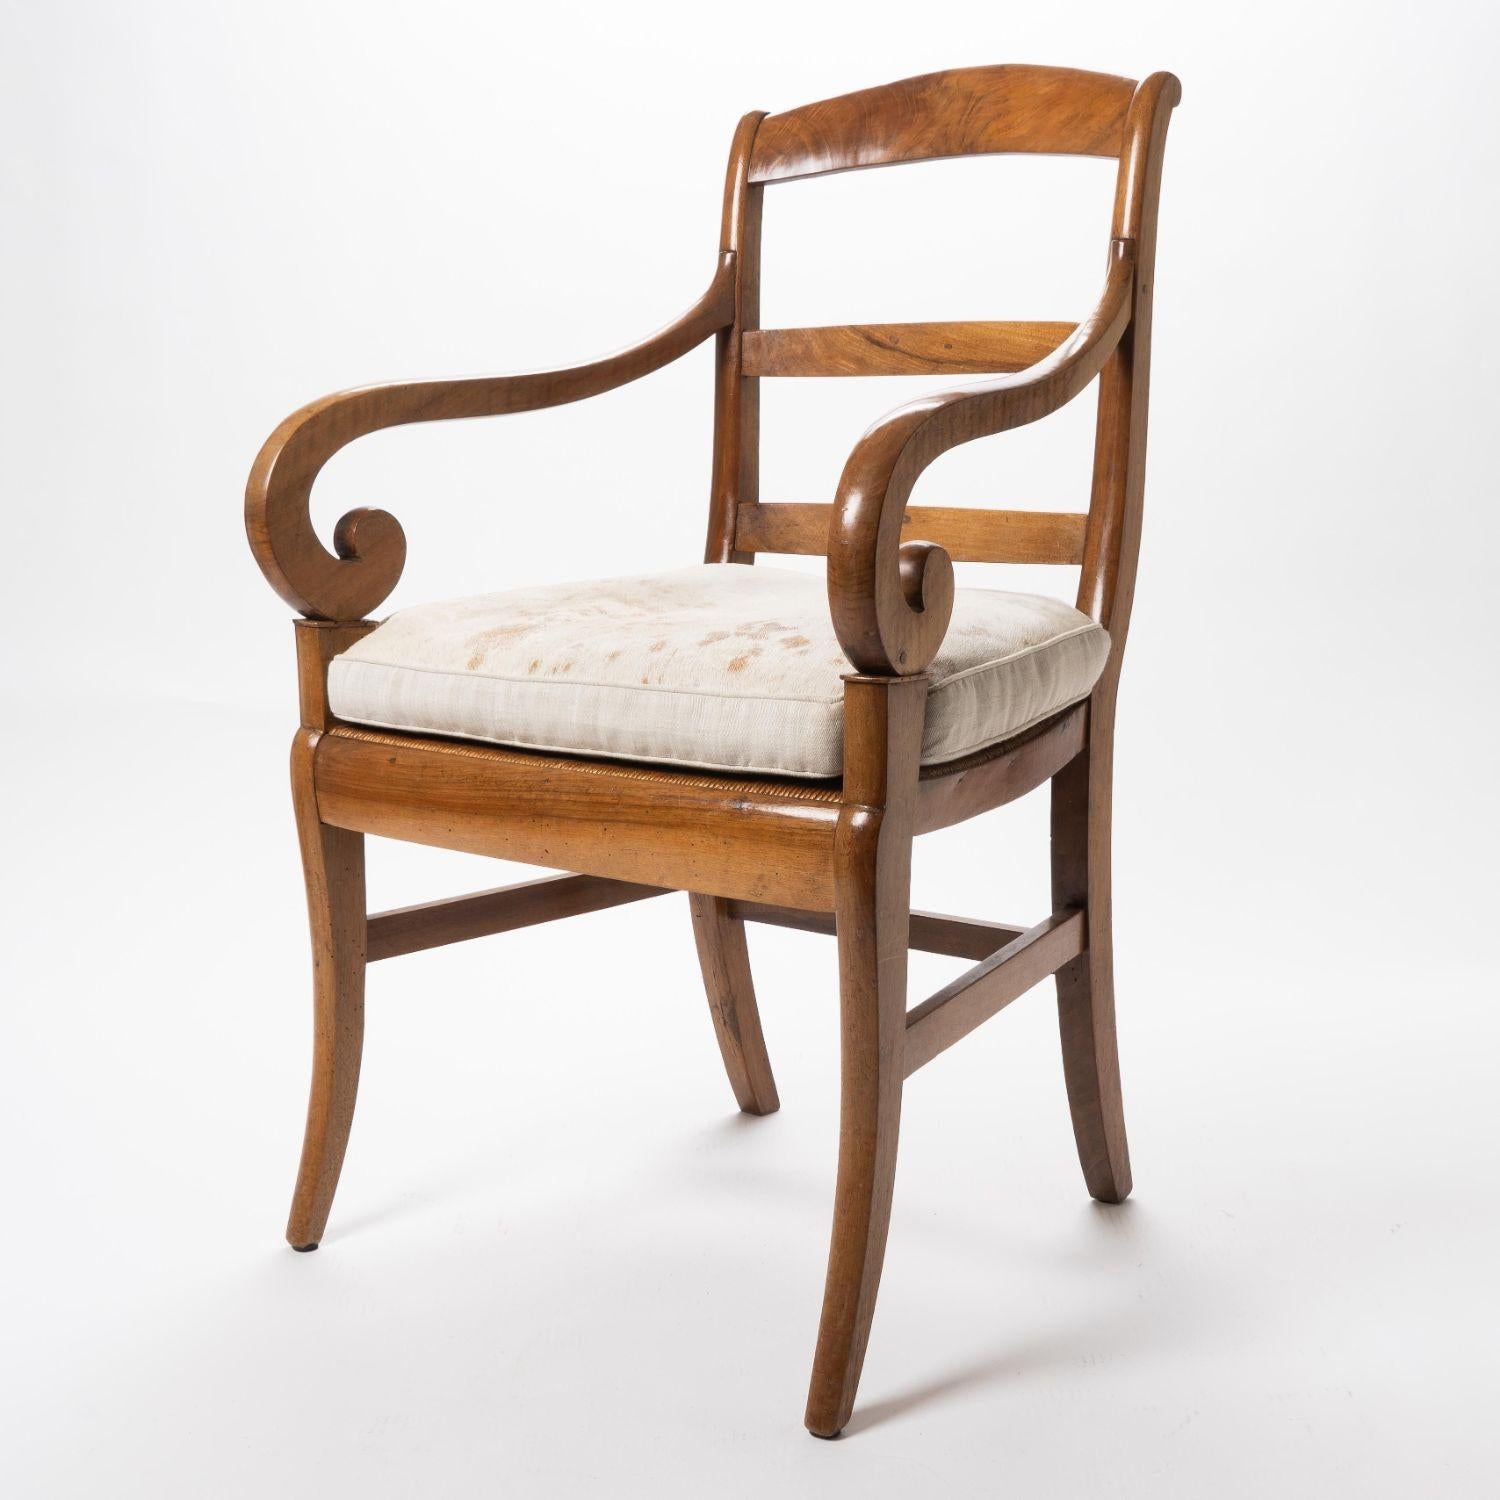 Cherry wood fauteuil (open armchair) with a finely woven natural rush seat. The ram’s horn arms are supported by a plinth above the seat frame, and the front, pseudo-sabre legs. The legs are joined by a boxed stretcher, and the seat is fitted with a